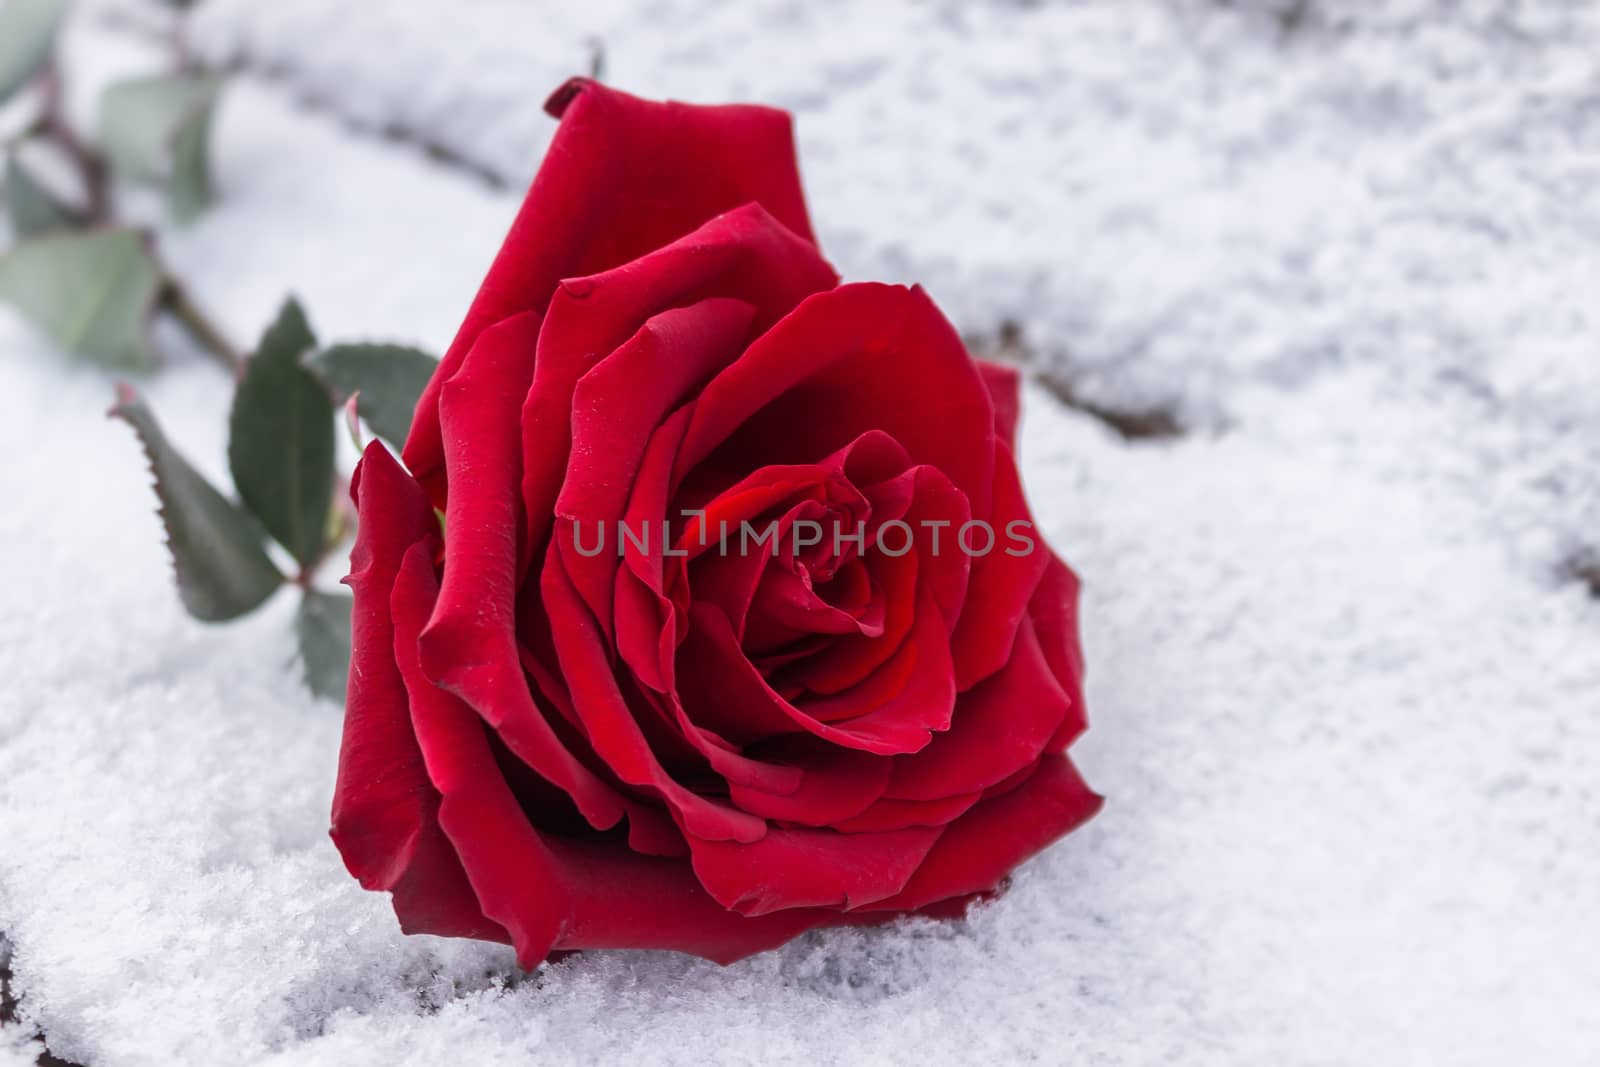 A close-up of a red rose bud lies in the cold snow in winter by Skaron